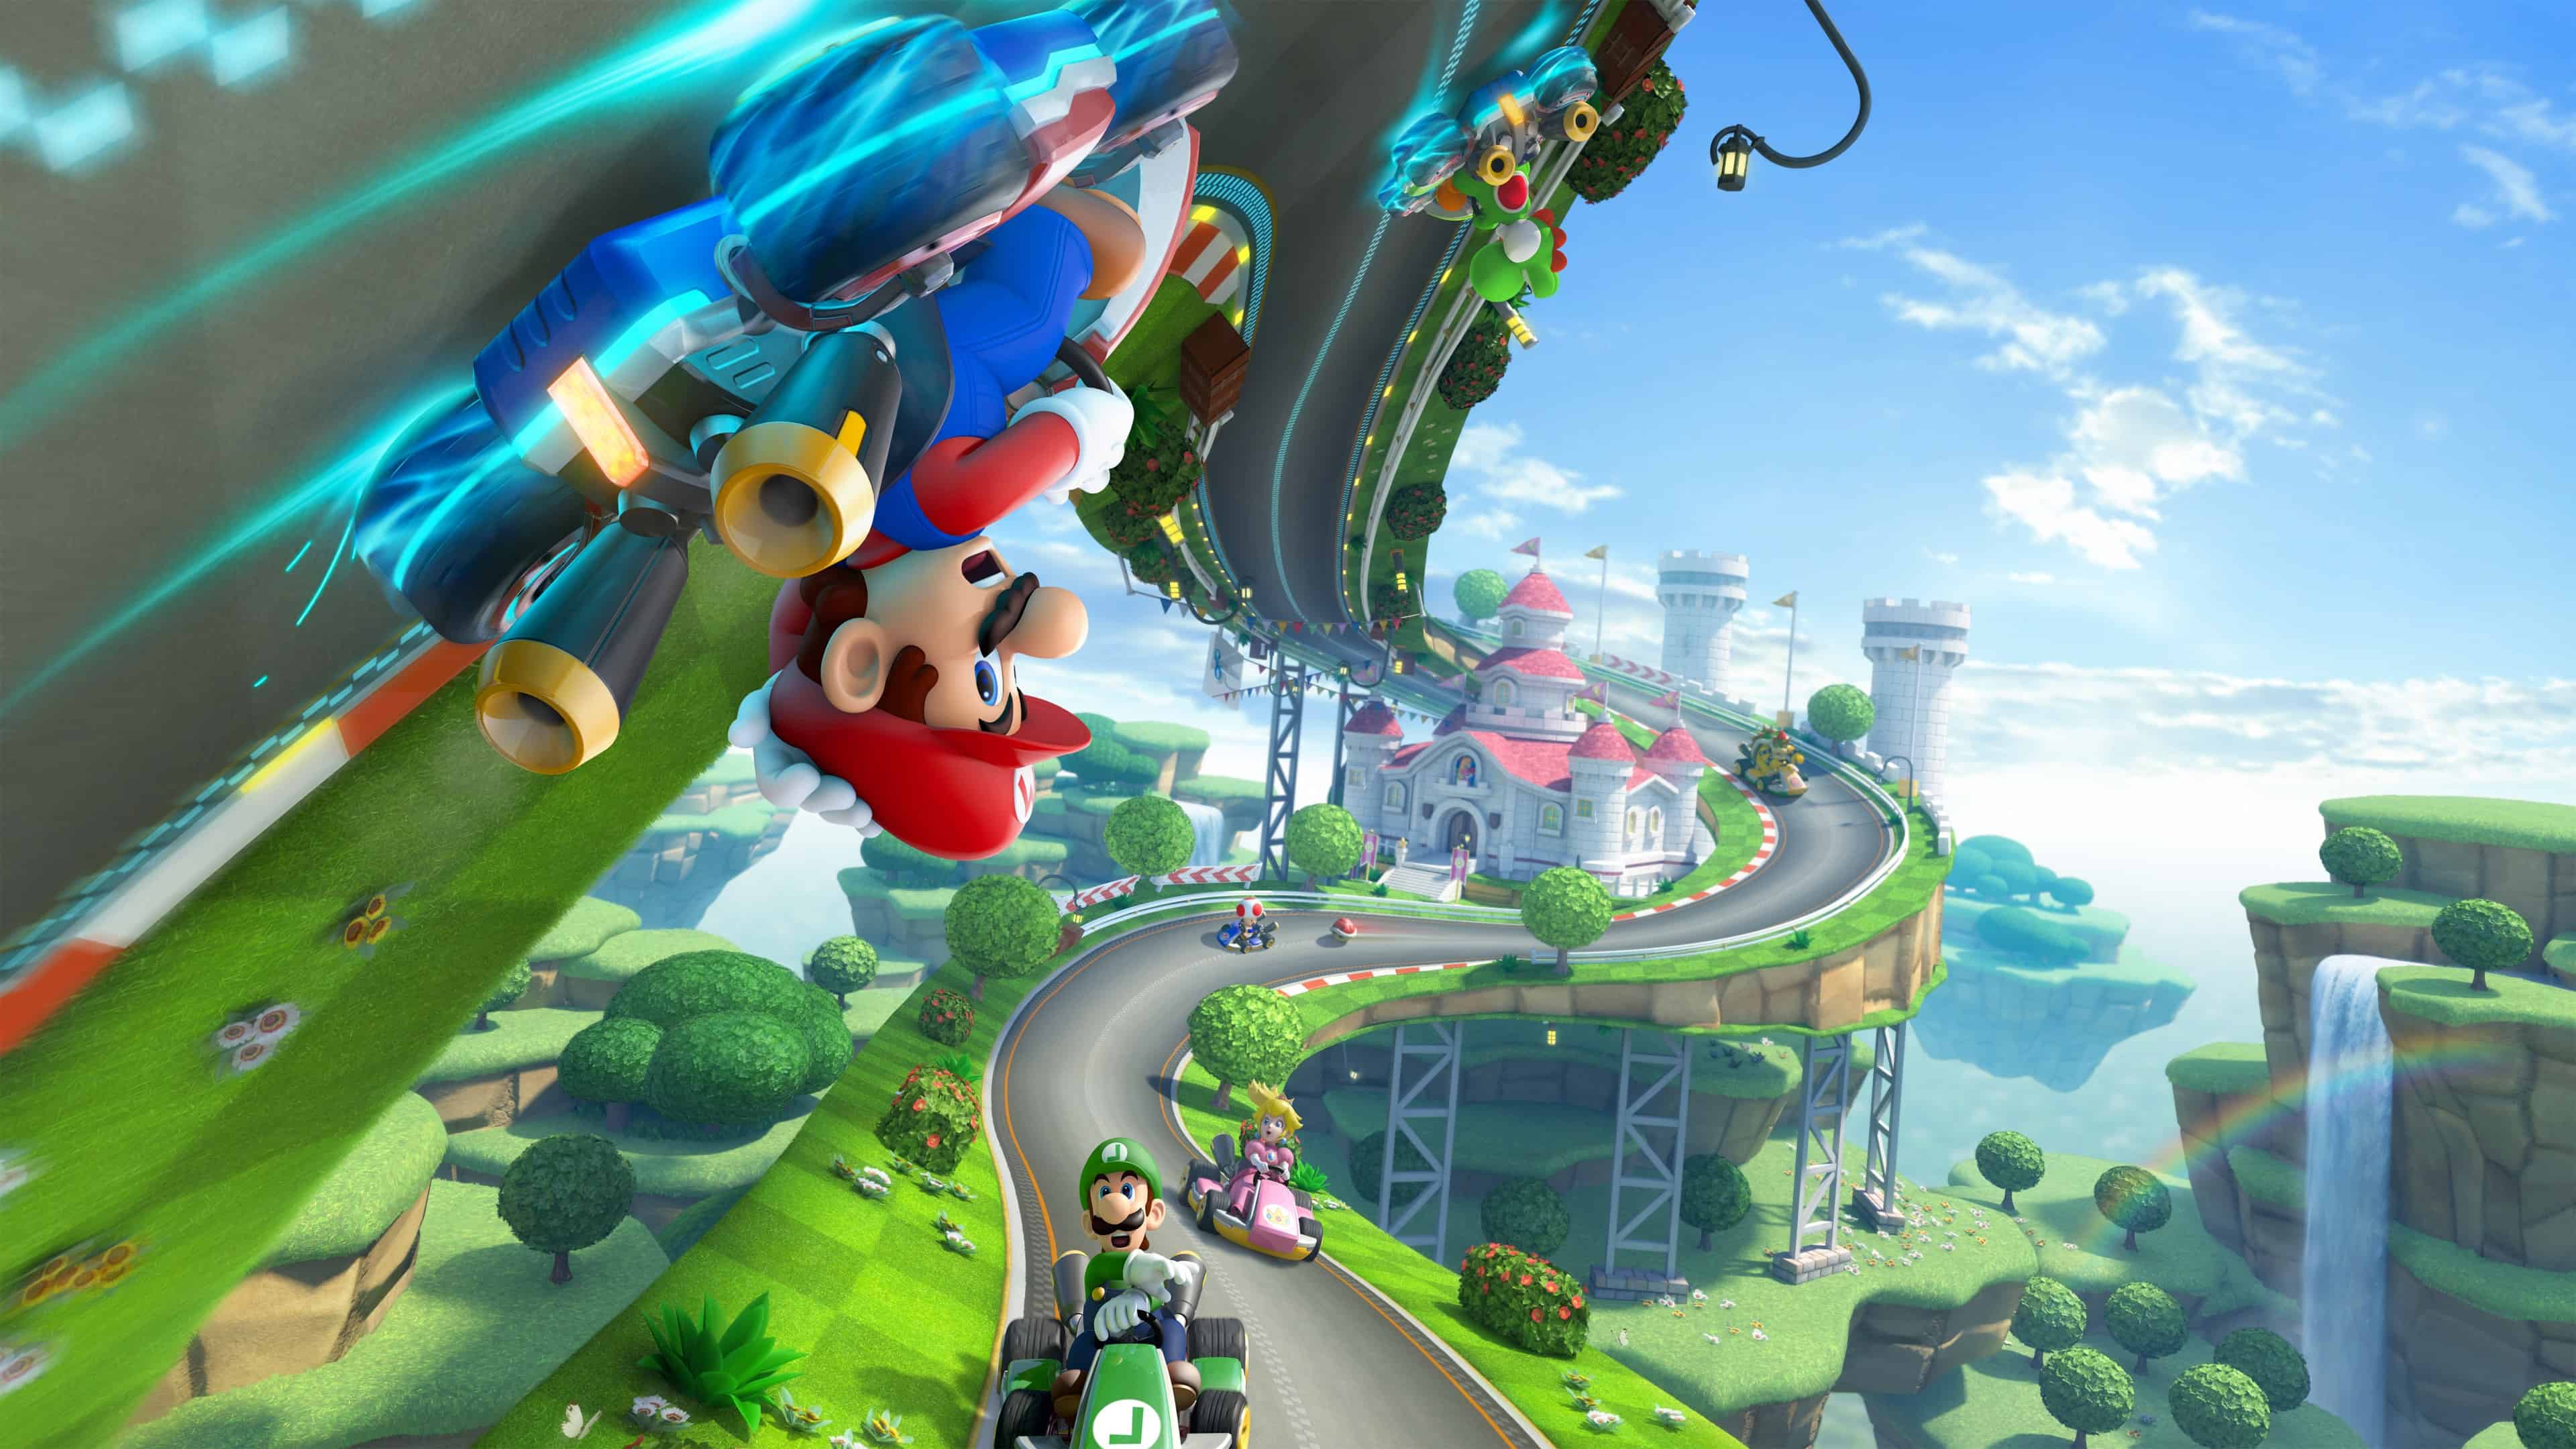 Mario Kart Wallpaper Image In Collection